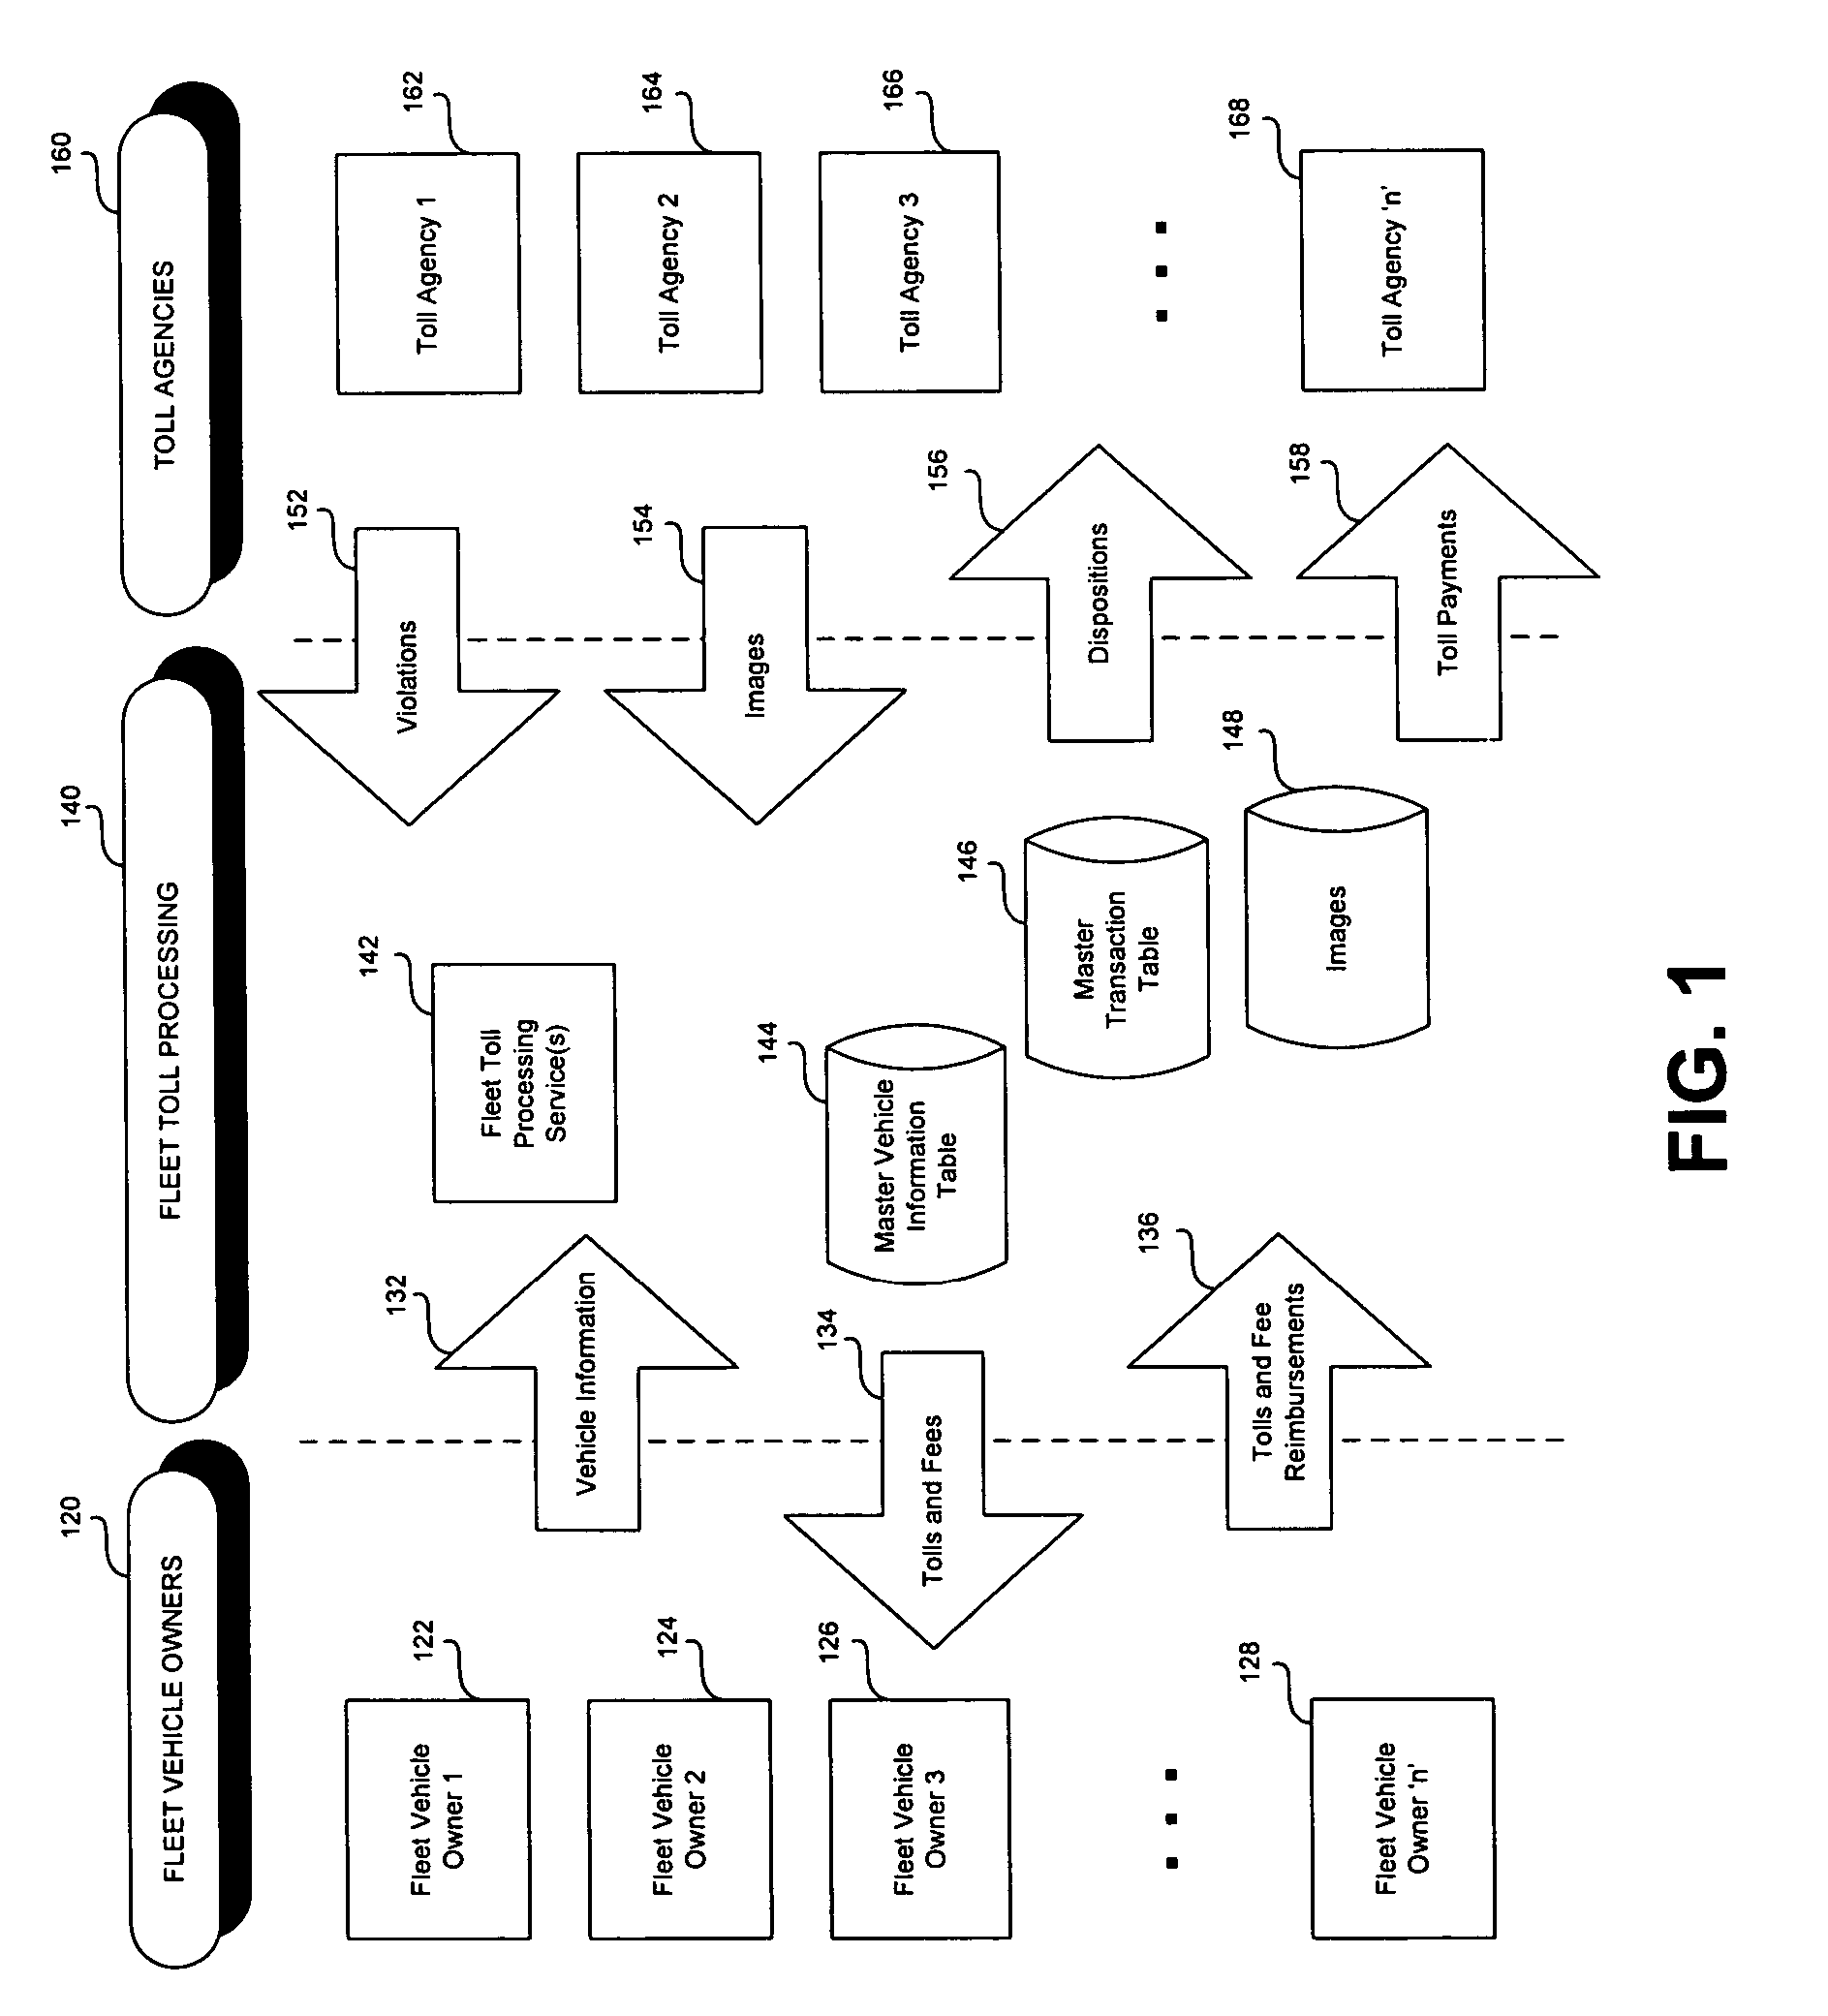 System and method for processing toll transactions